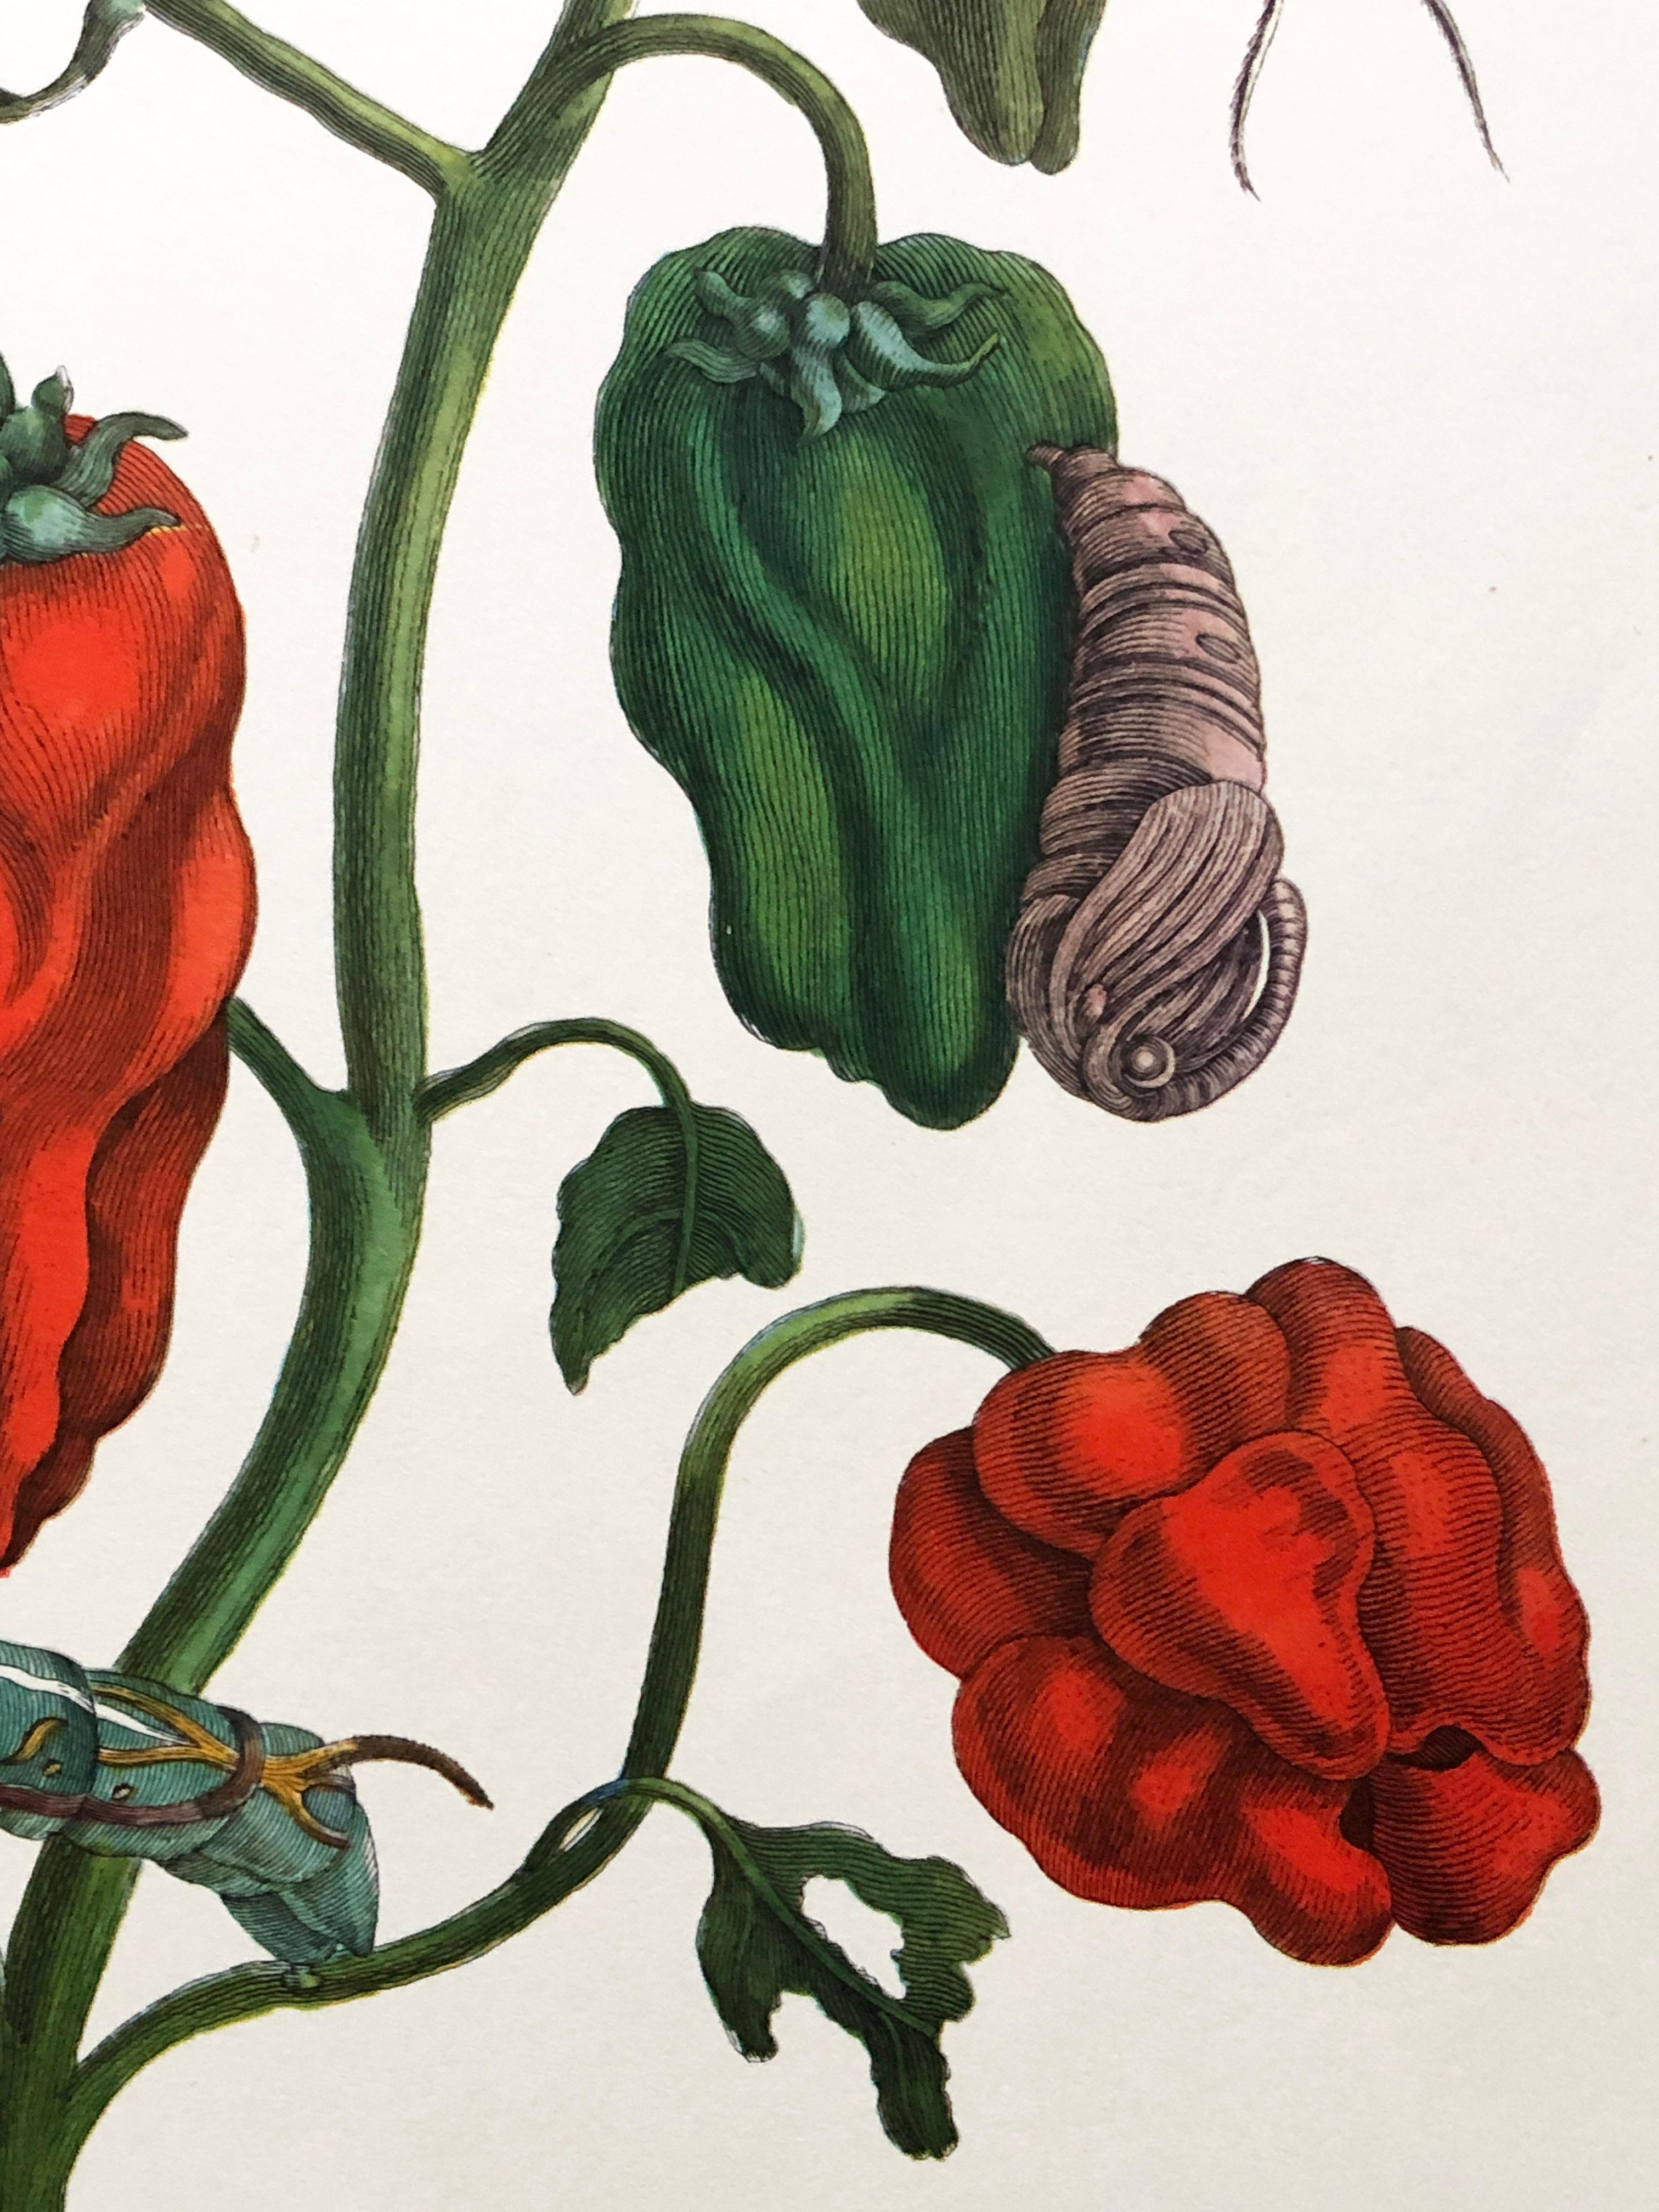 Maria Sibylla Merian - P. Sluyter - Peppers and Hawkmoths Nr. 55 For Sale 4